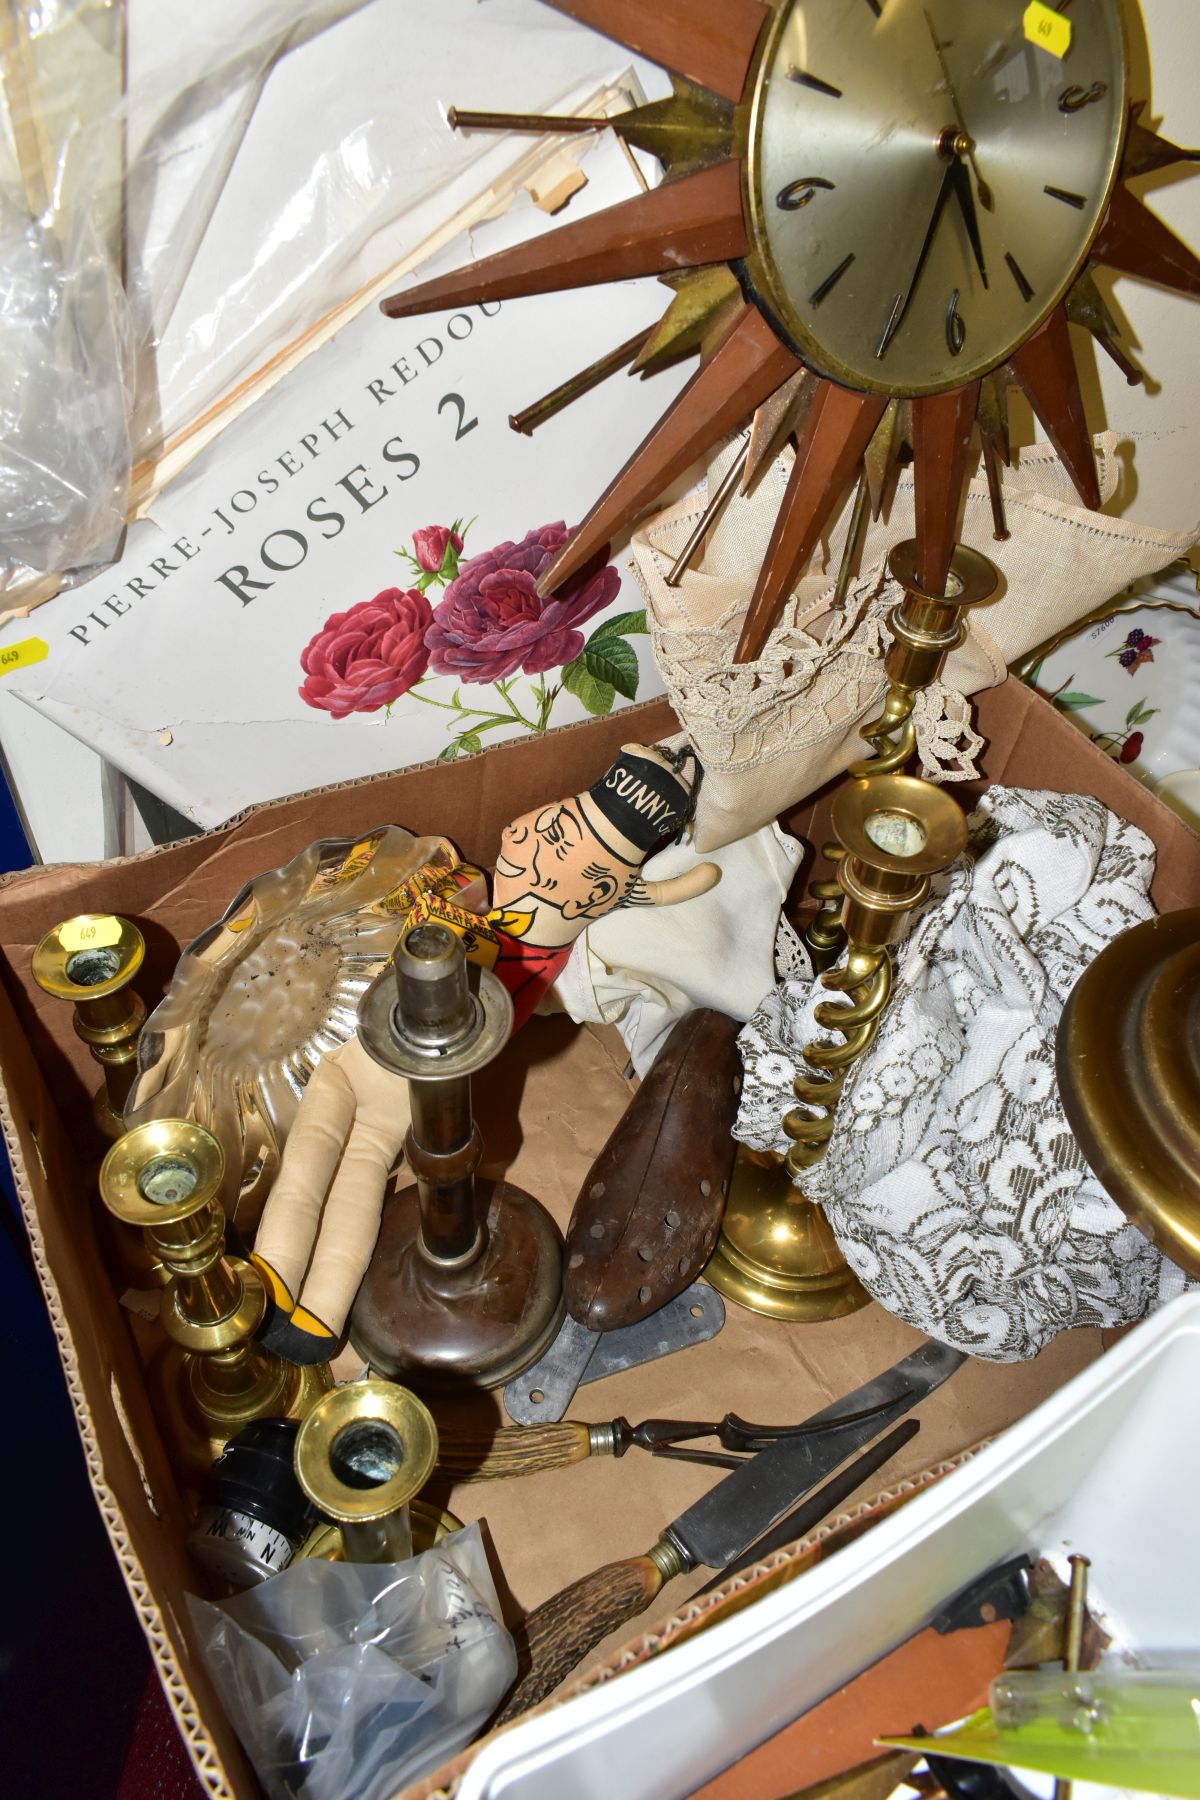 A BOX AND LOOSE SUNDRY ITEMS ETC, to include an Art Deco style 'Time Savings Clock Company' clock, - Image 7 of 12